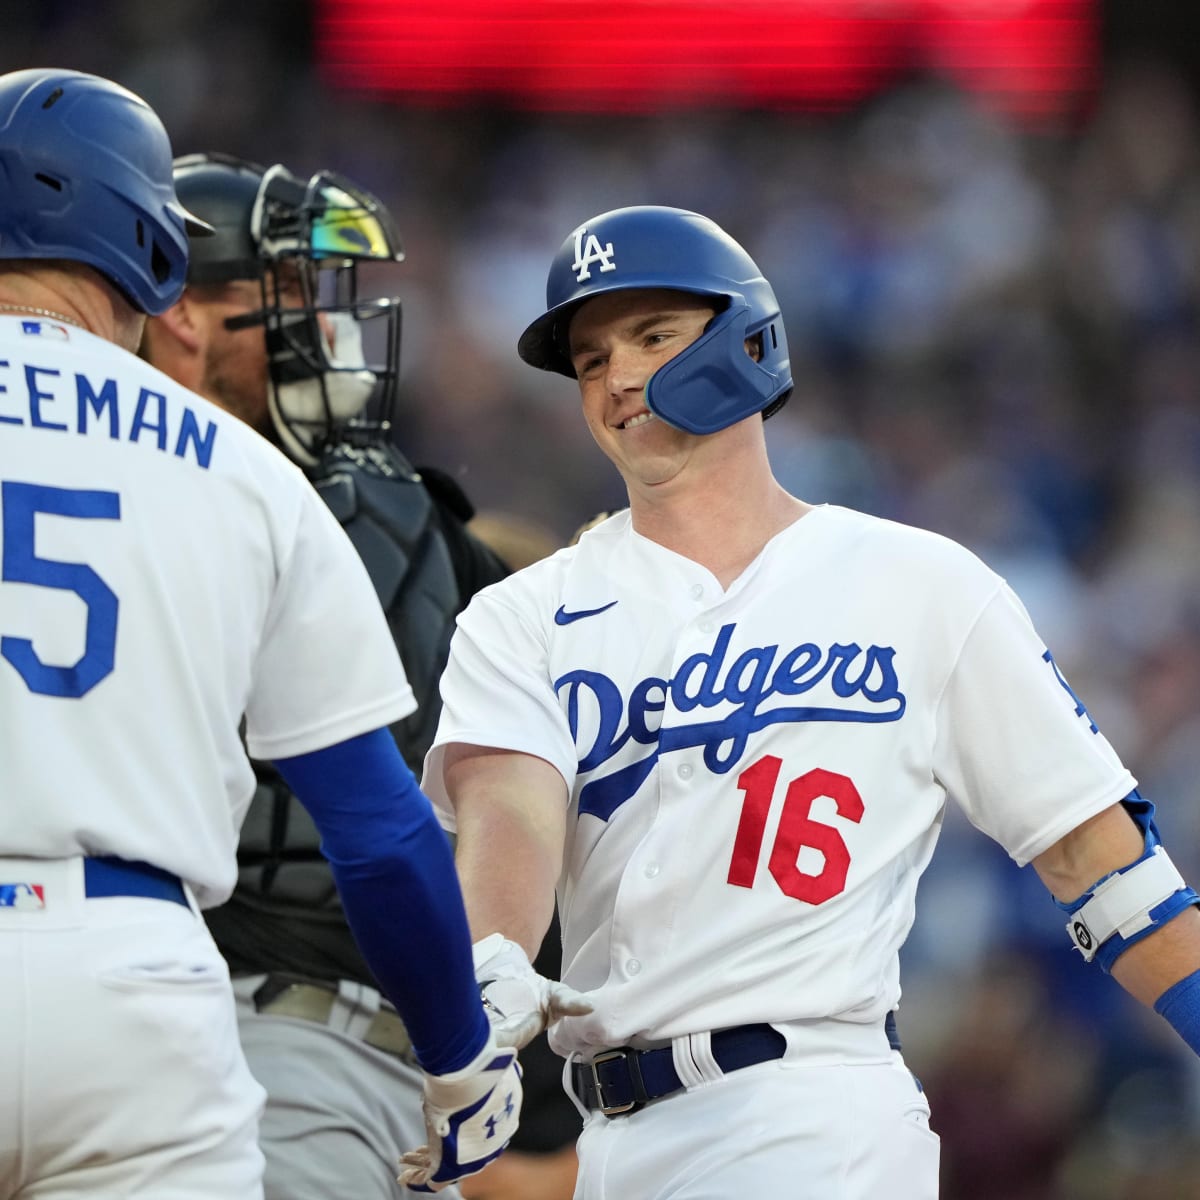 LA Dodgers: Corey Seager was rightfully named World Series MVP